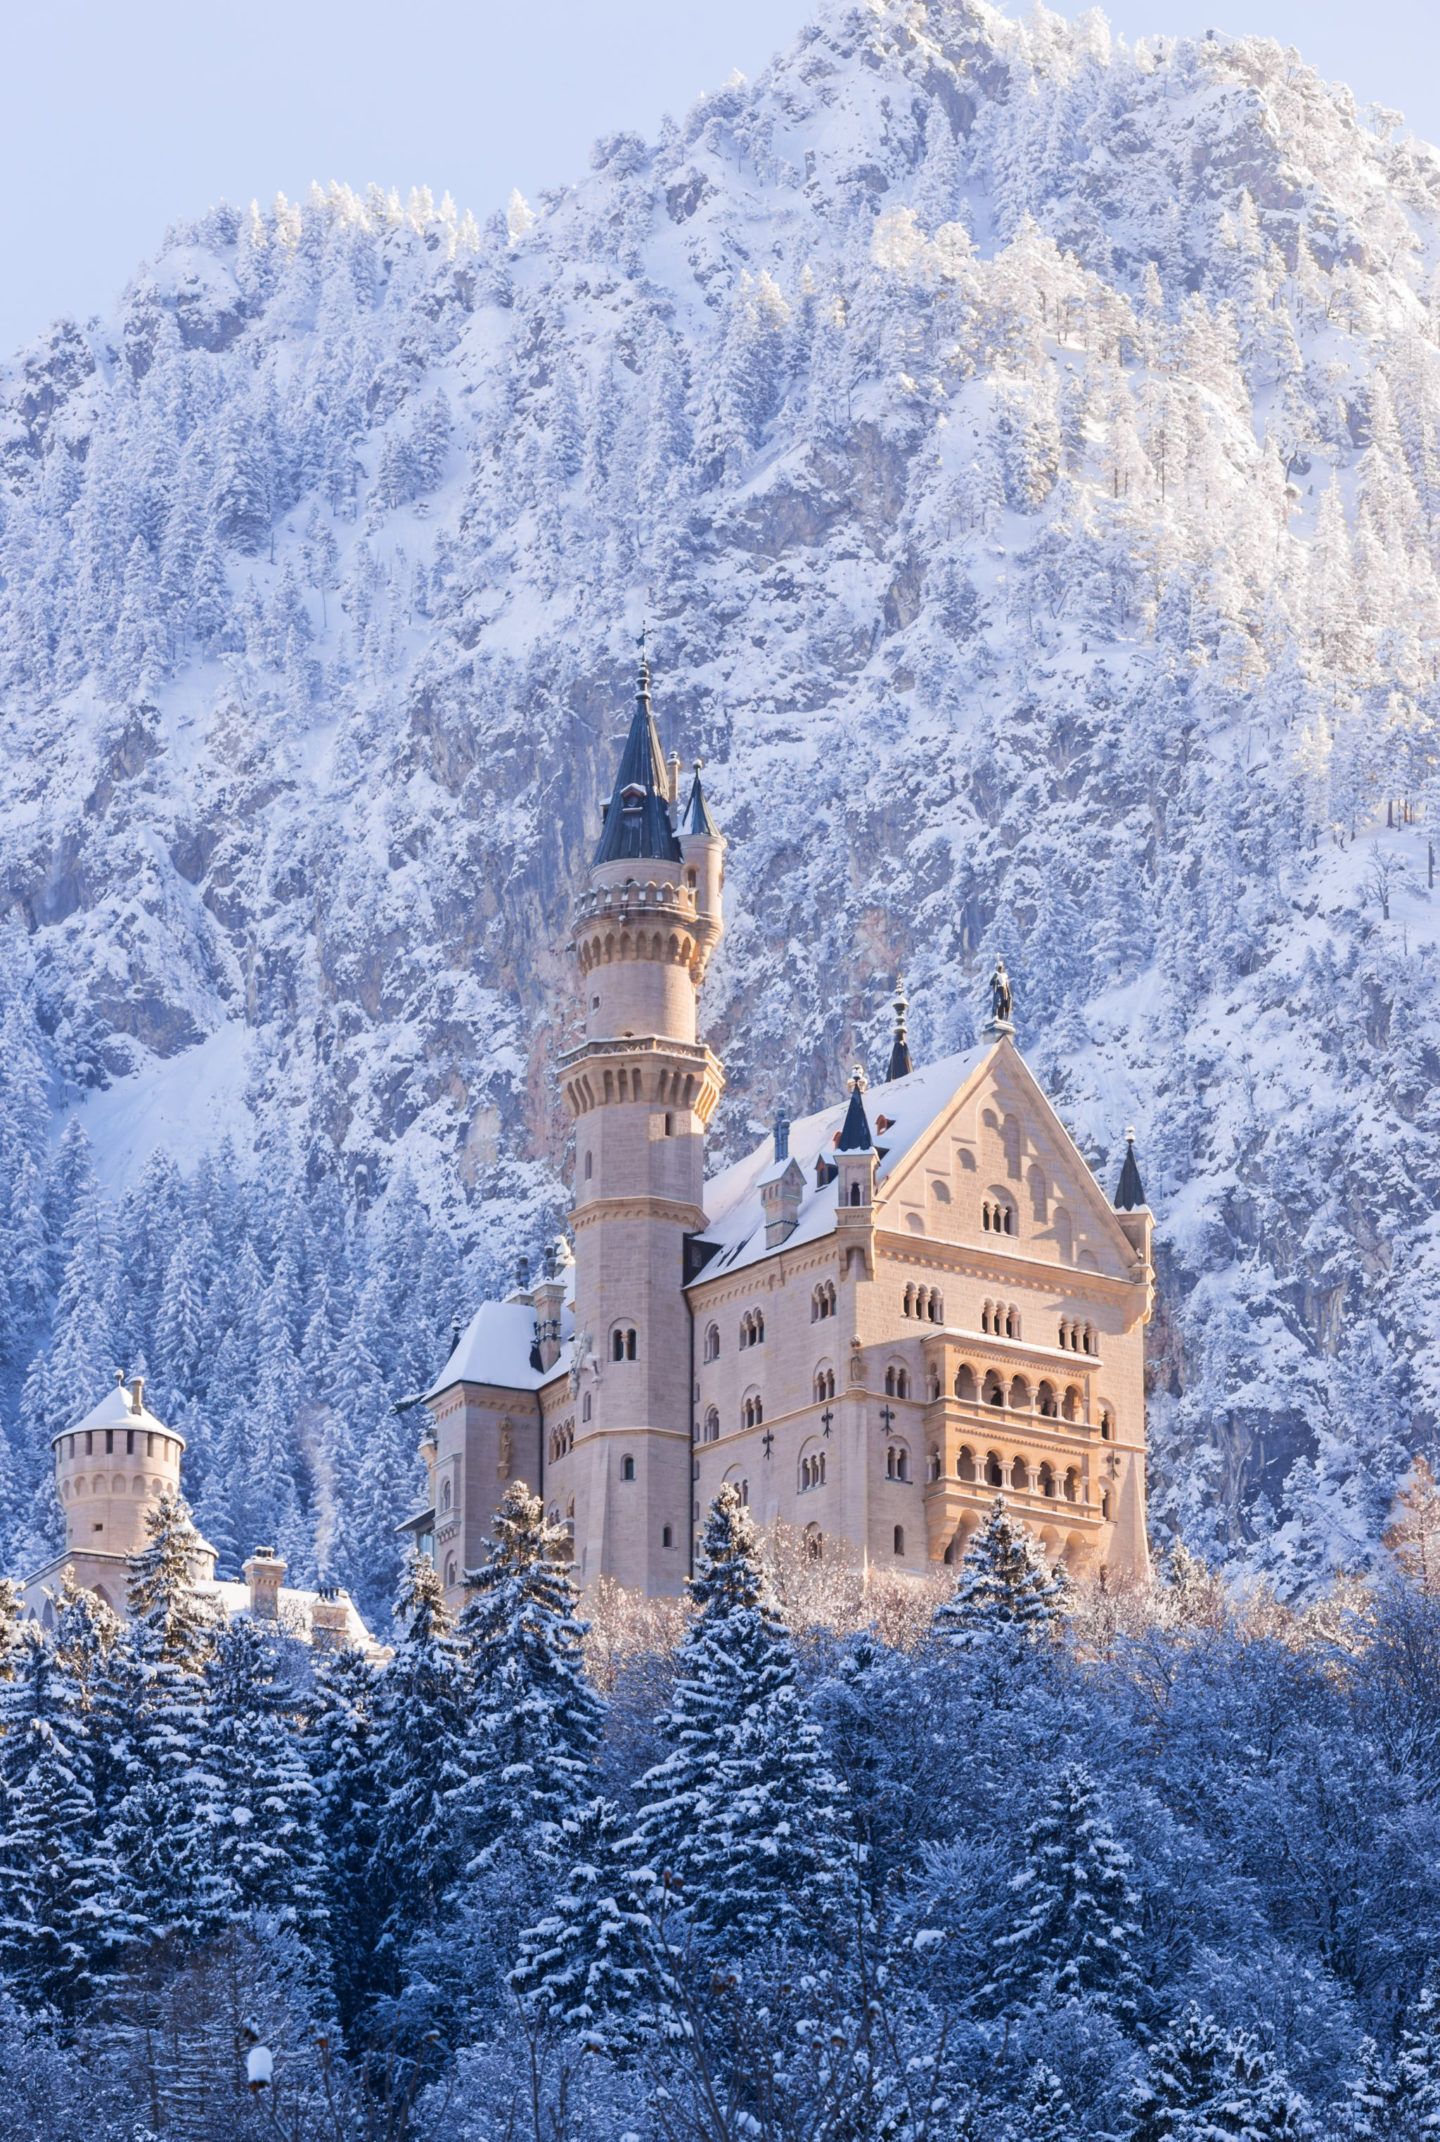 A castle in the mountains with snow on the trees - Castle